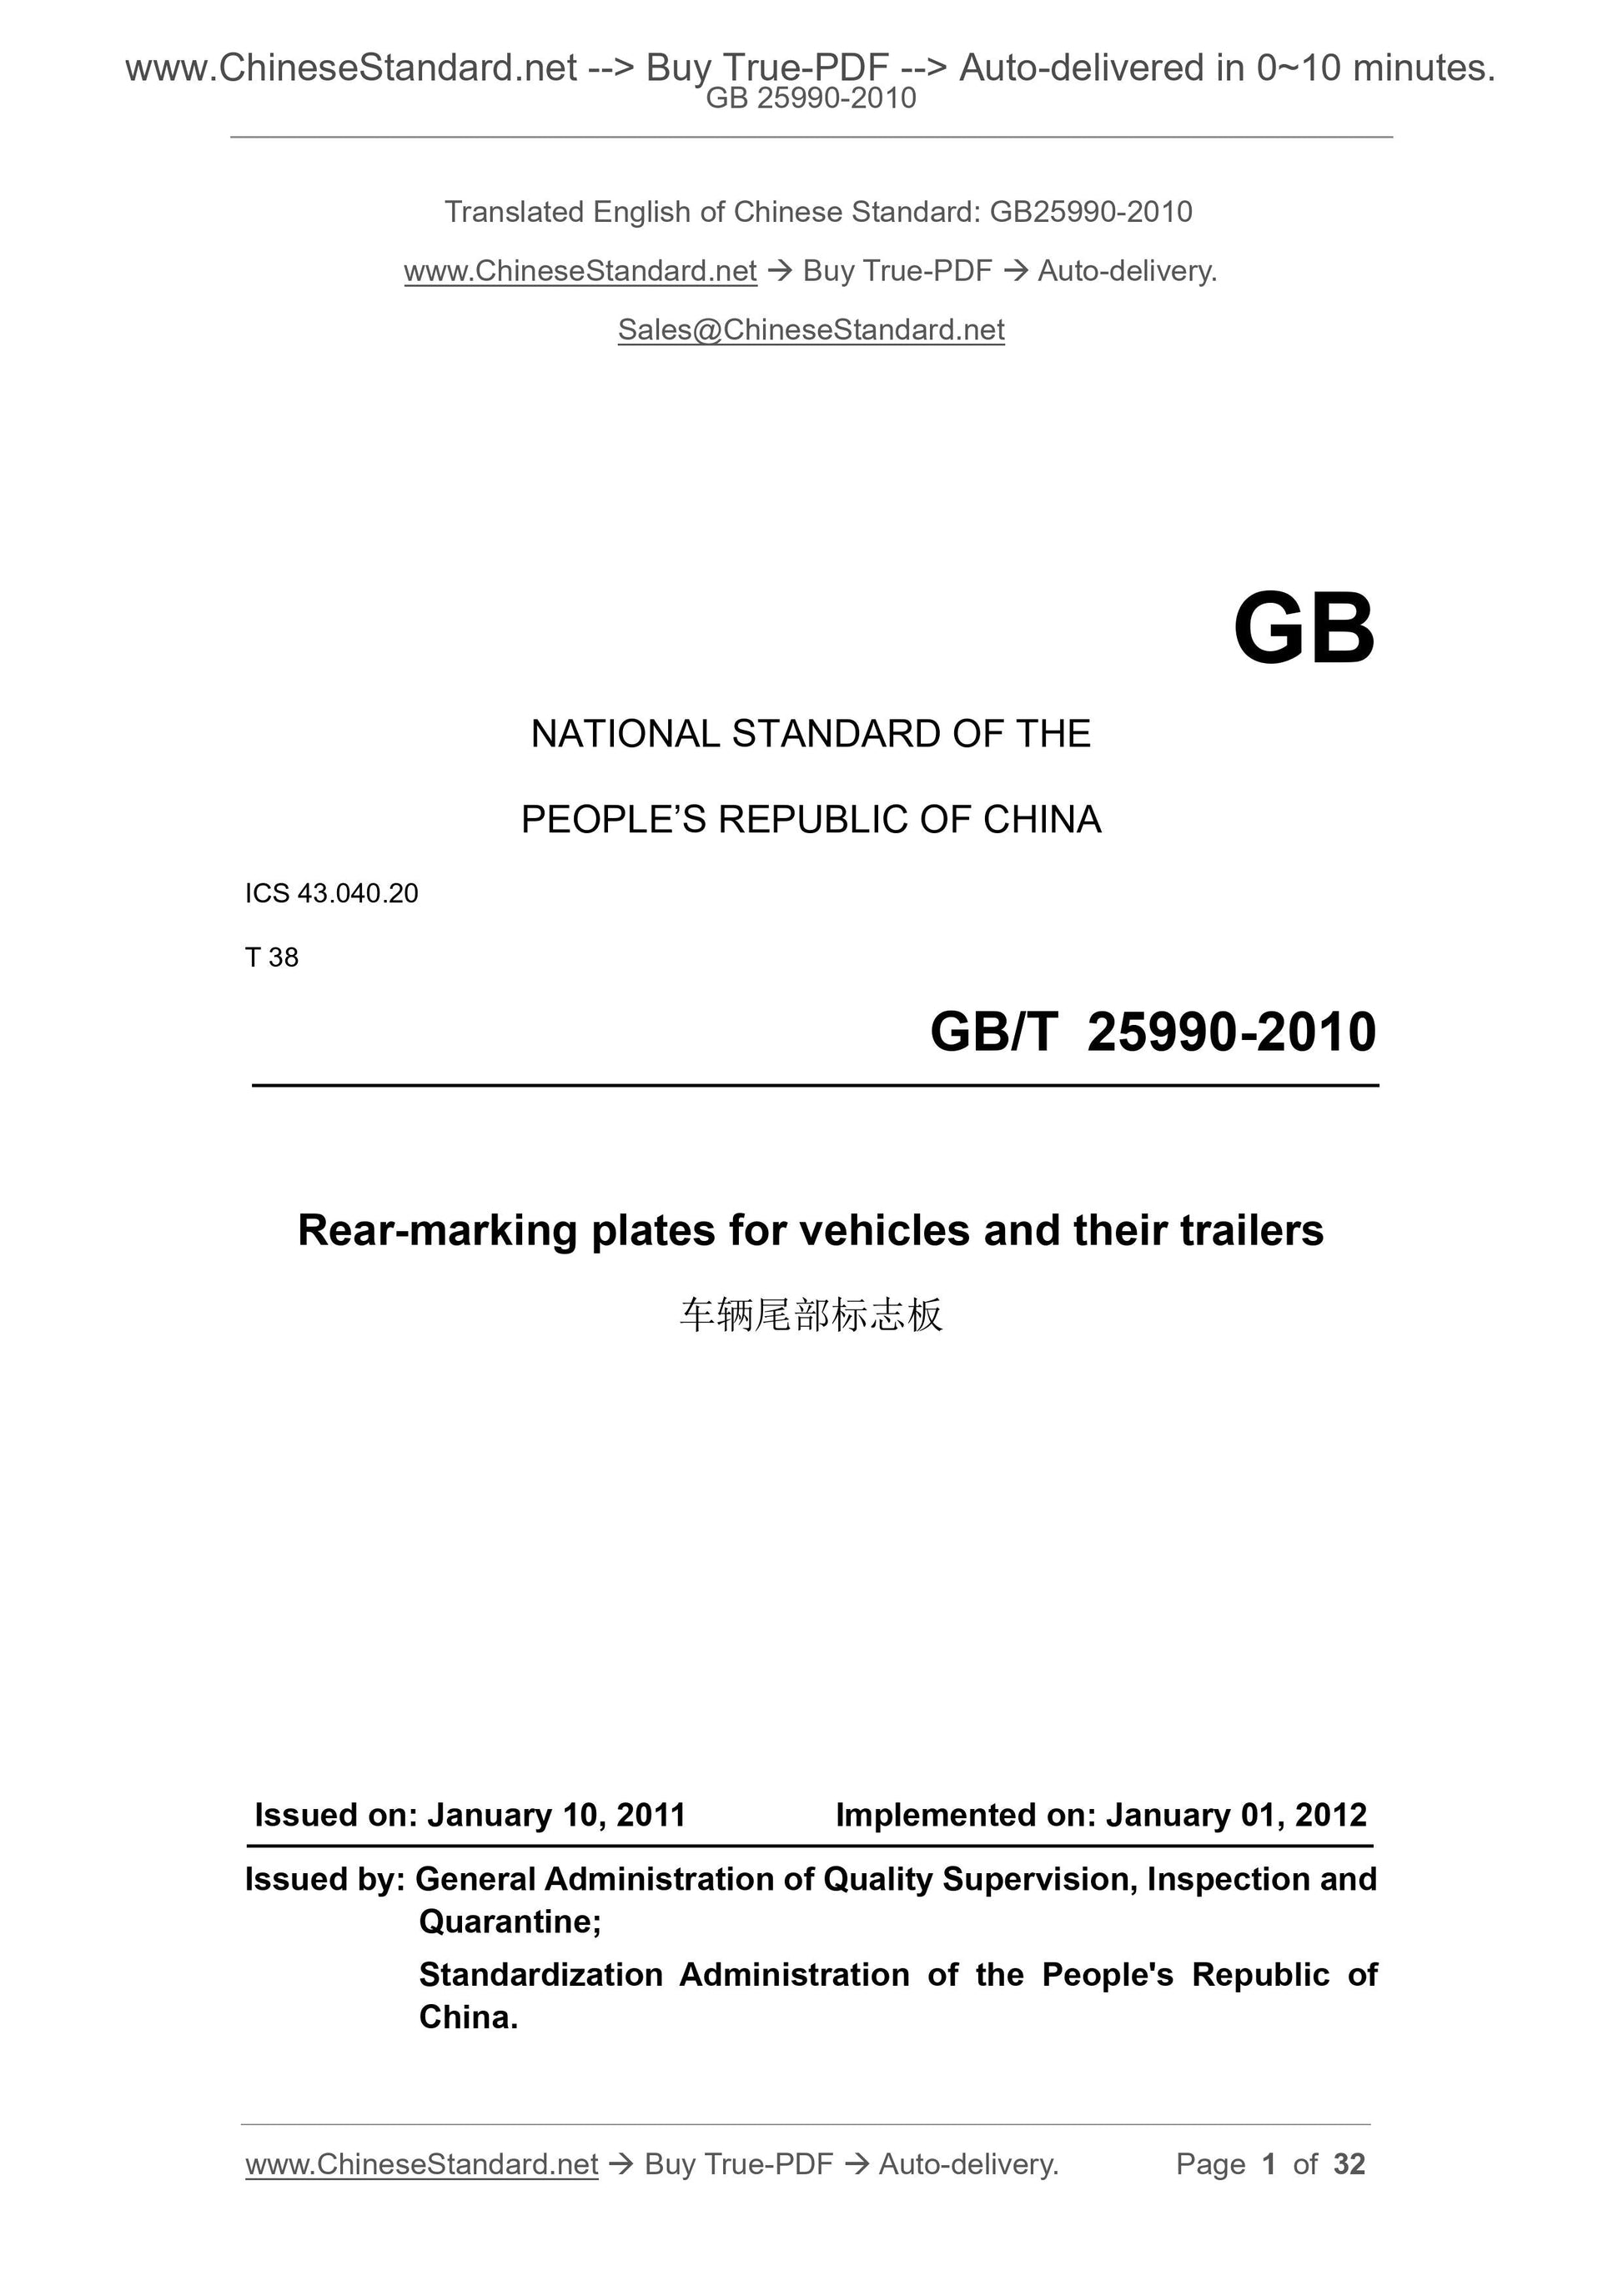 GB 25990-2010 Page 1